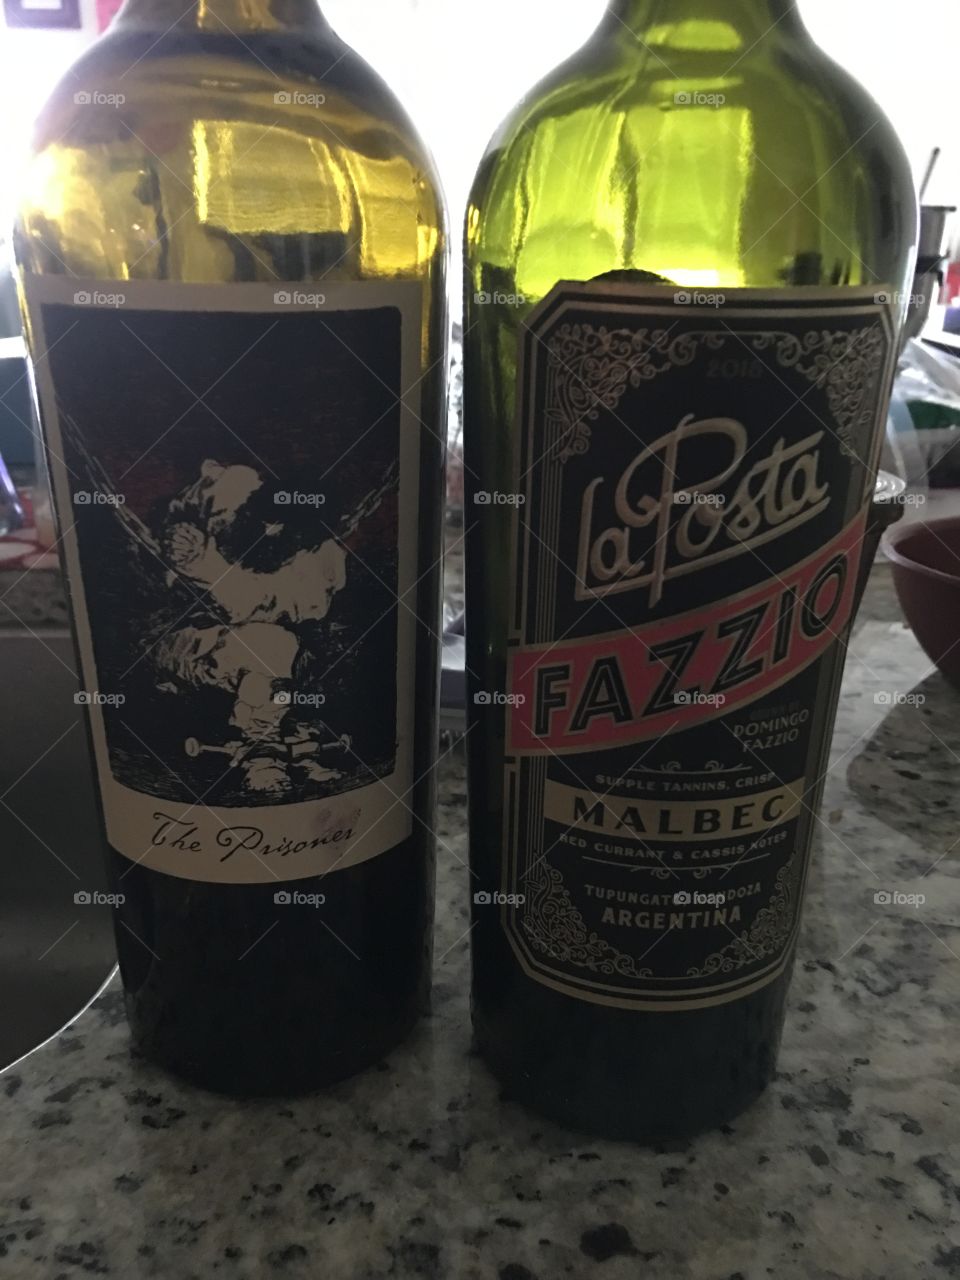 Who doesn’t love wine? These are my two favorites!